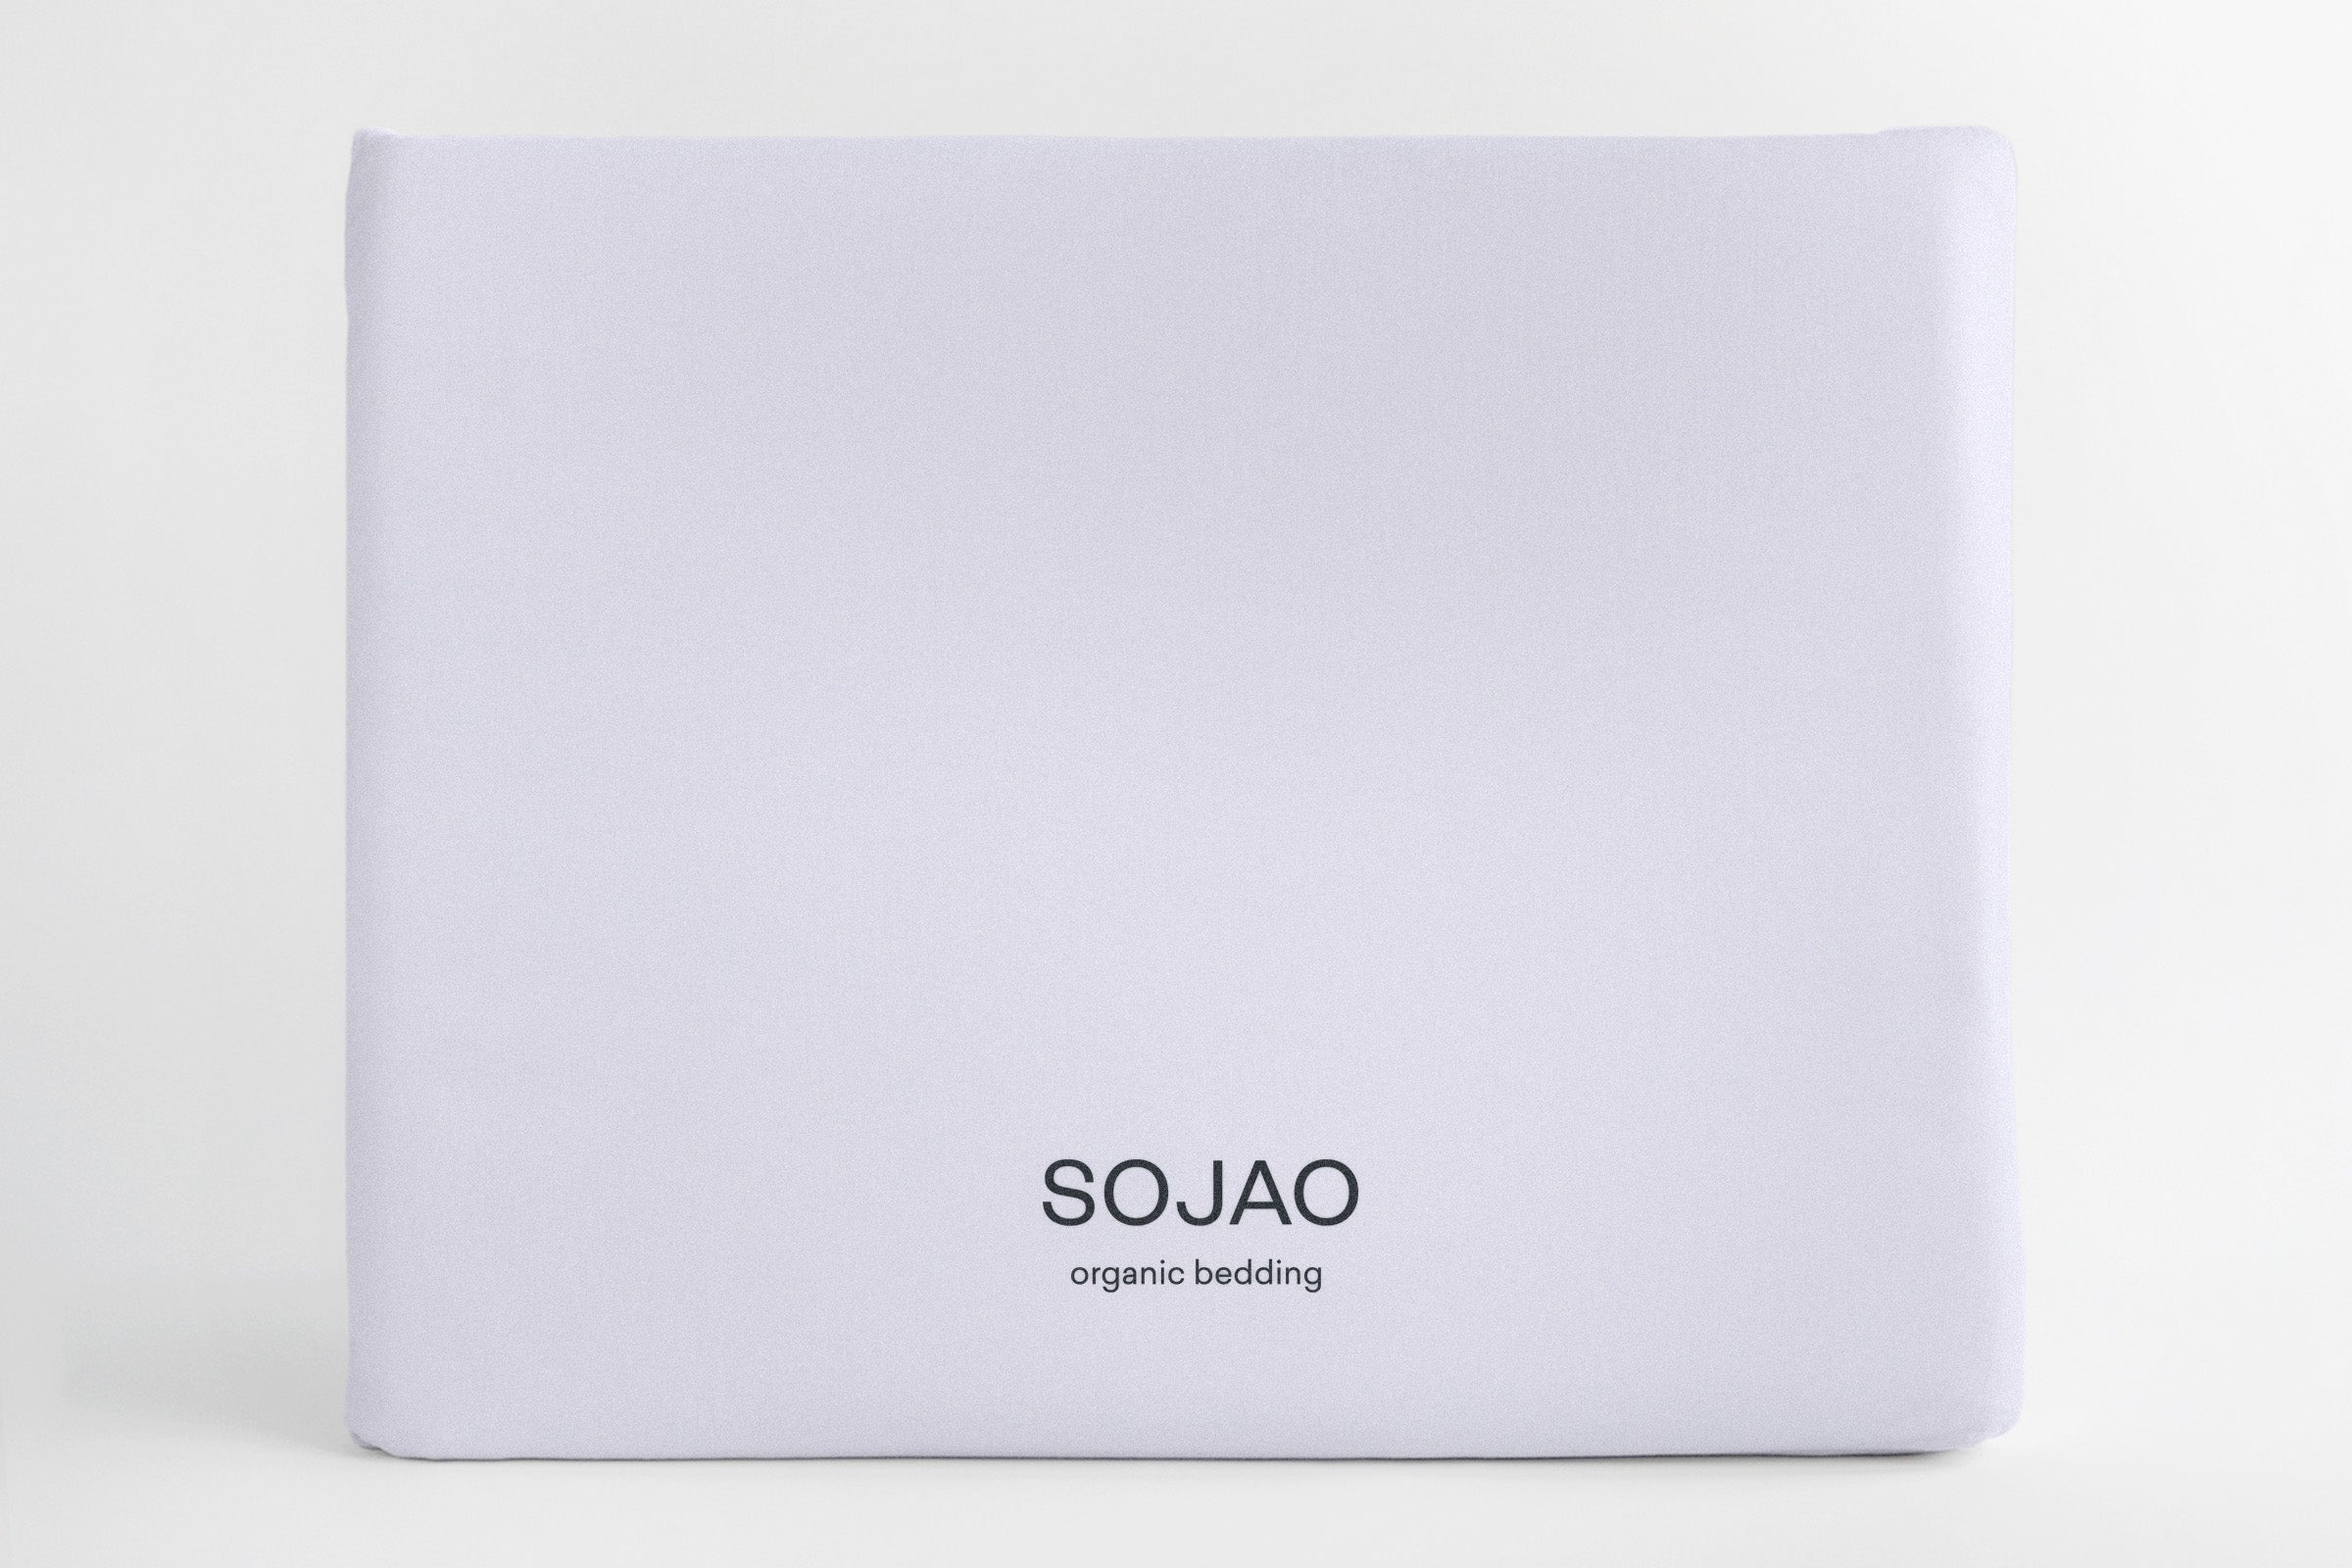 classic-lilac-duvet-cover-dust-bag-by-sojao.jpg